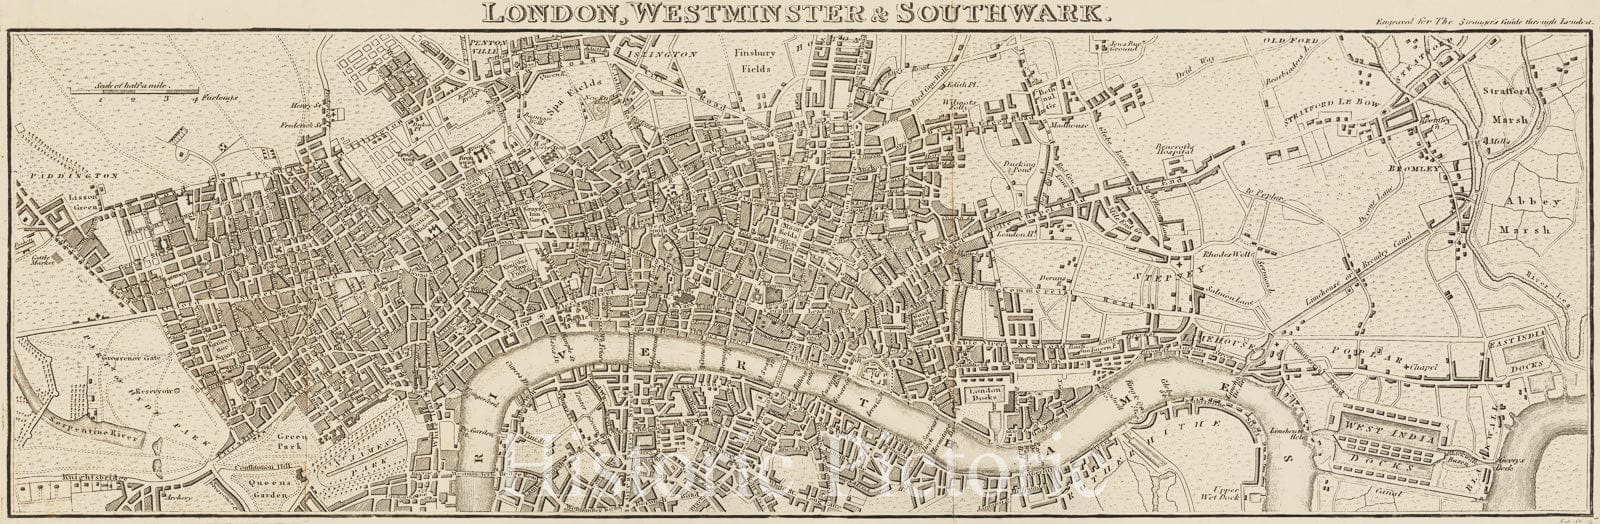 Historic Map : London, Westminster and Southwark, 1808, James Cundee, Vintage Wall Art